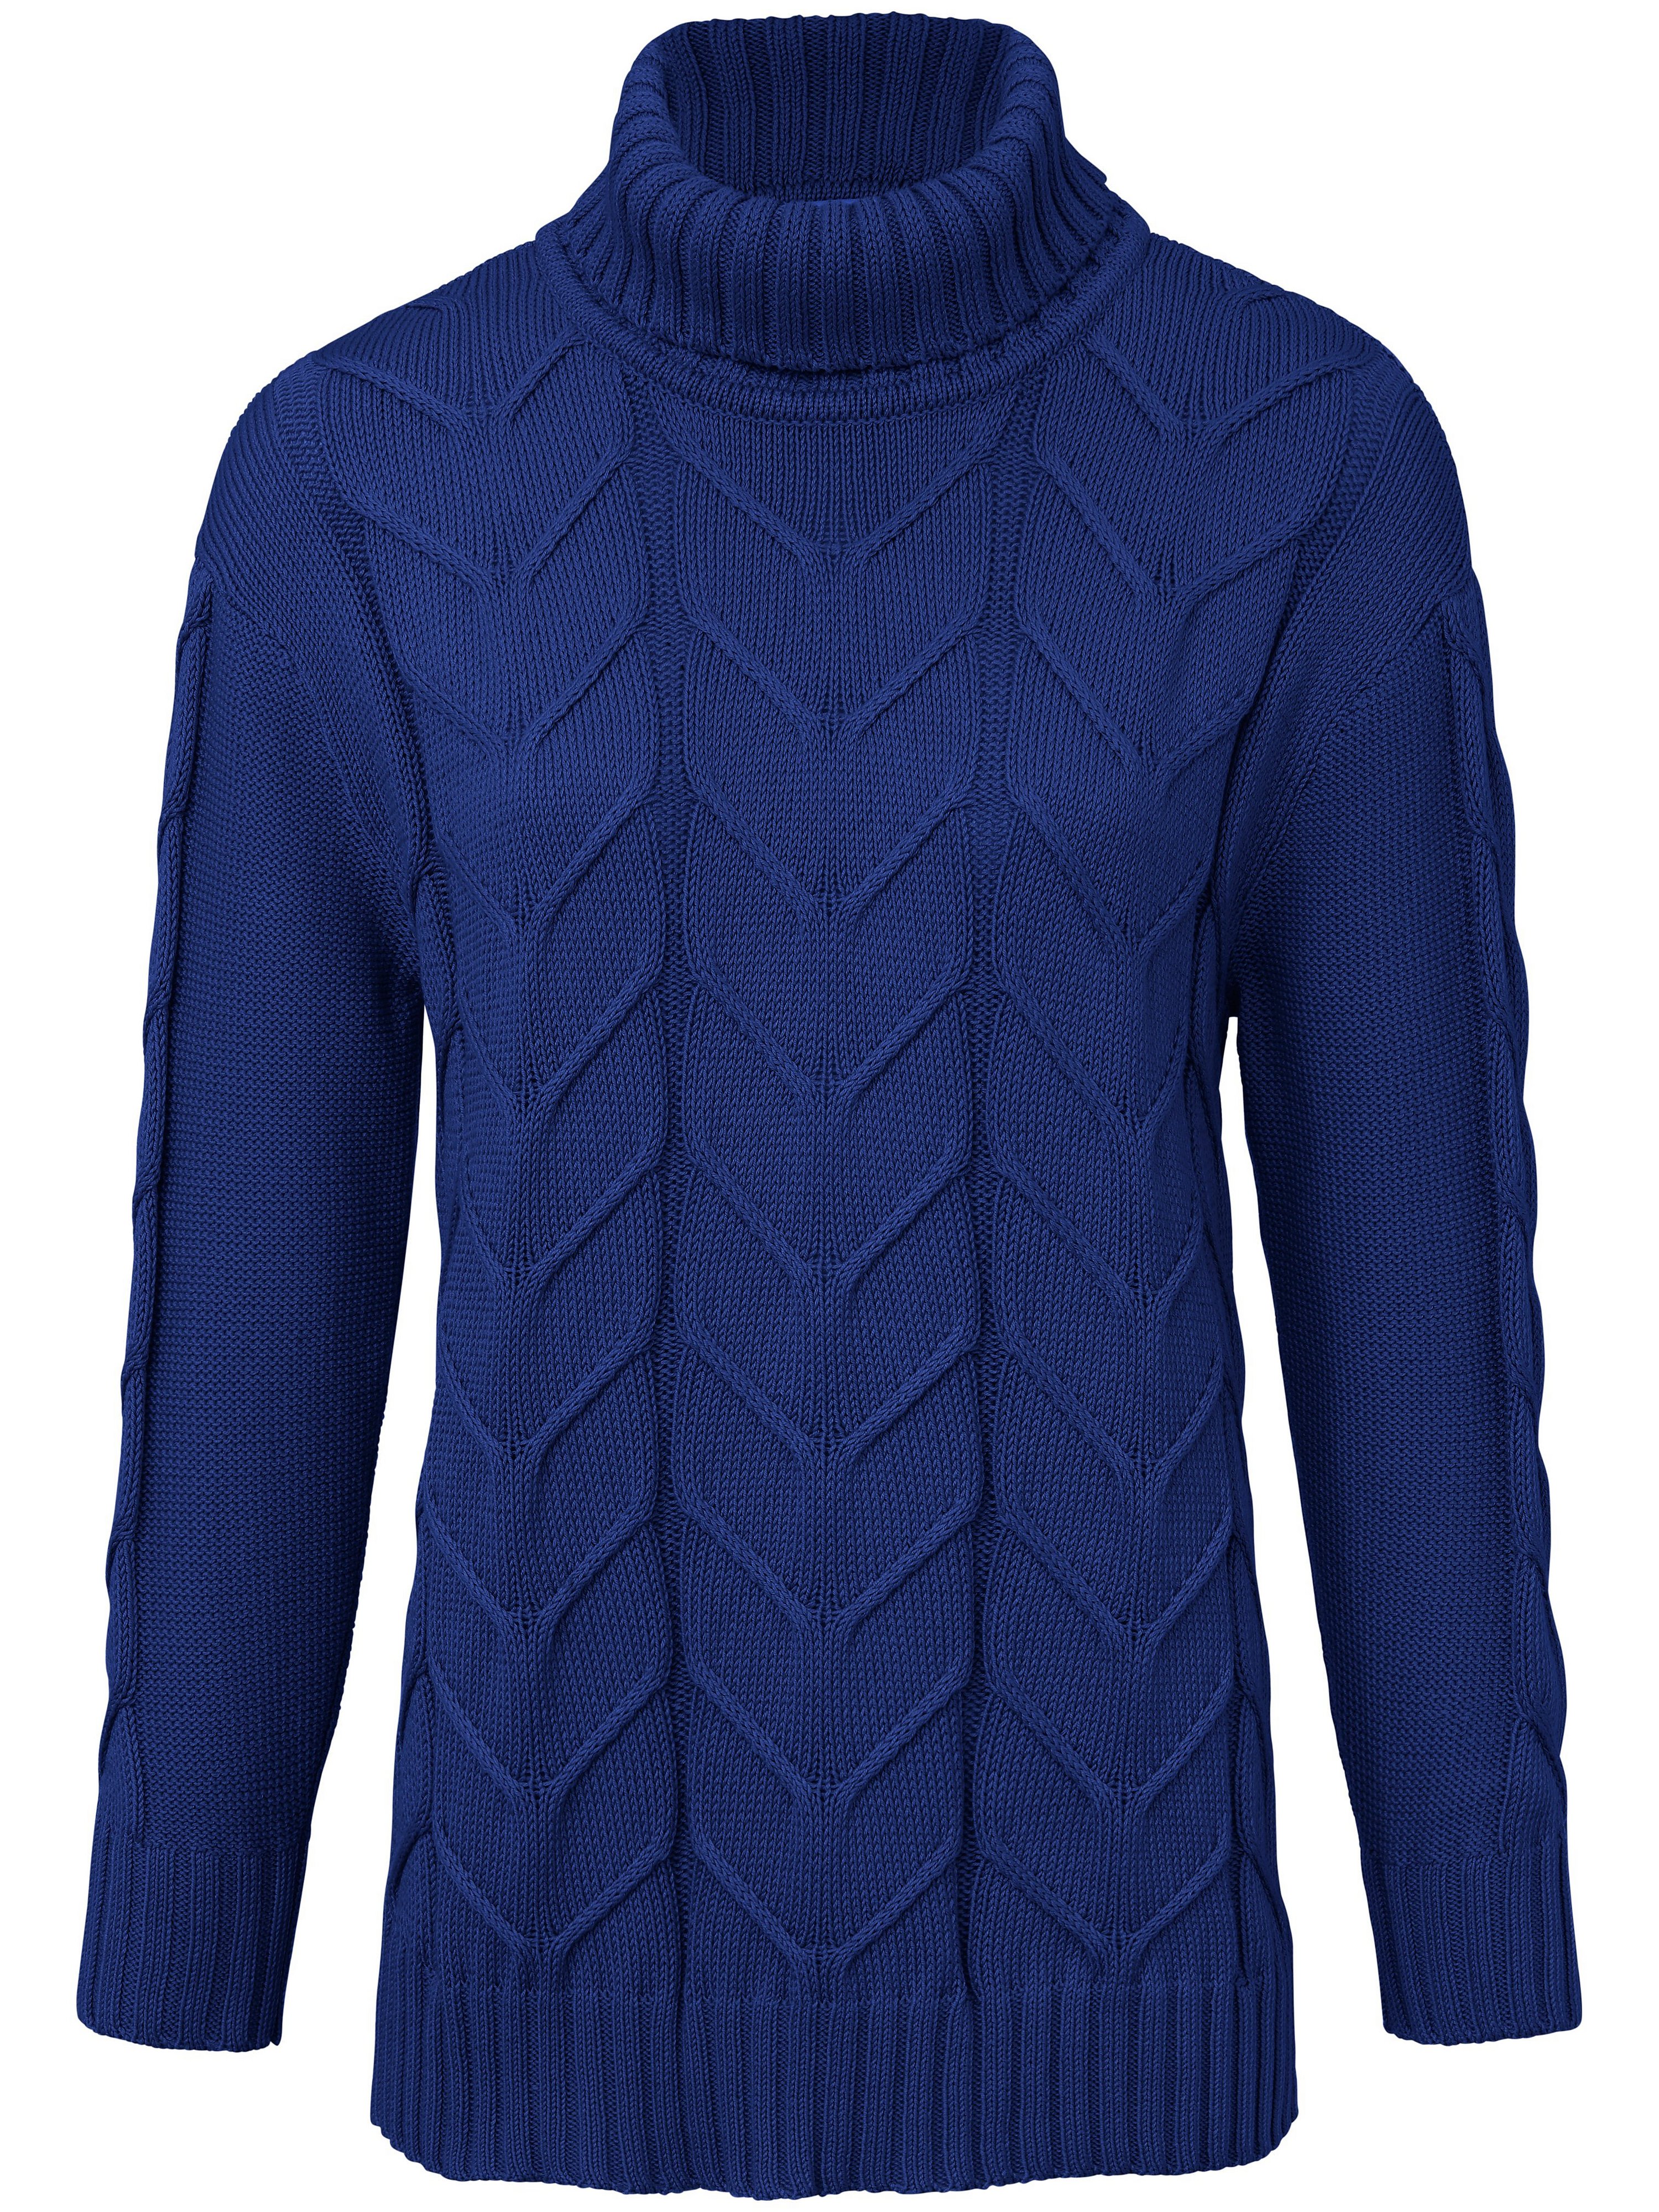 Le pull 100% coton  Looxent bleu taille 46